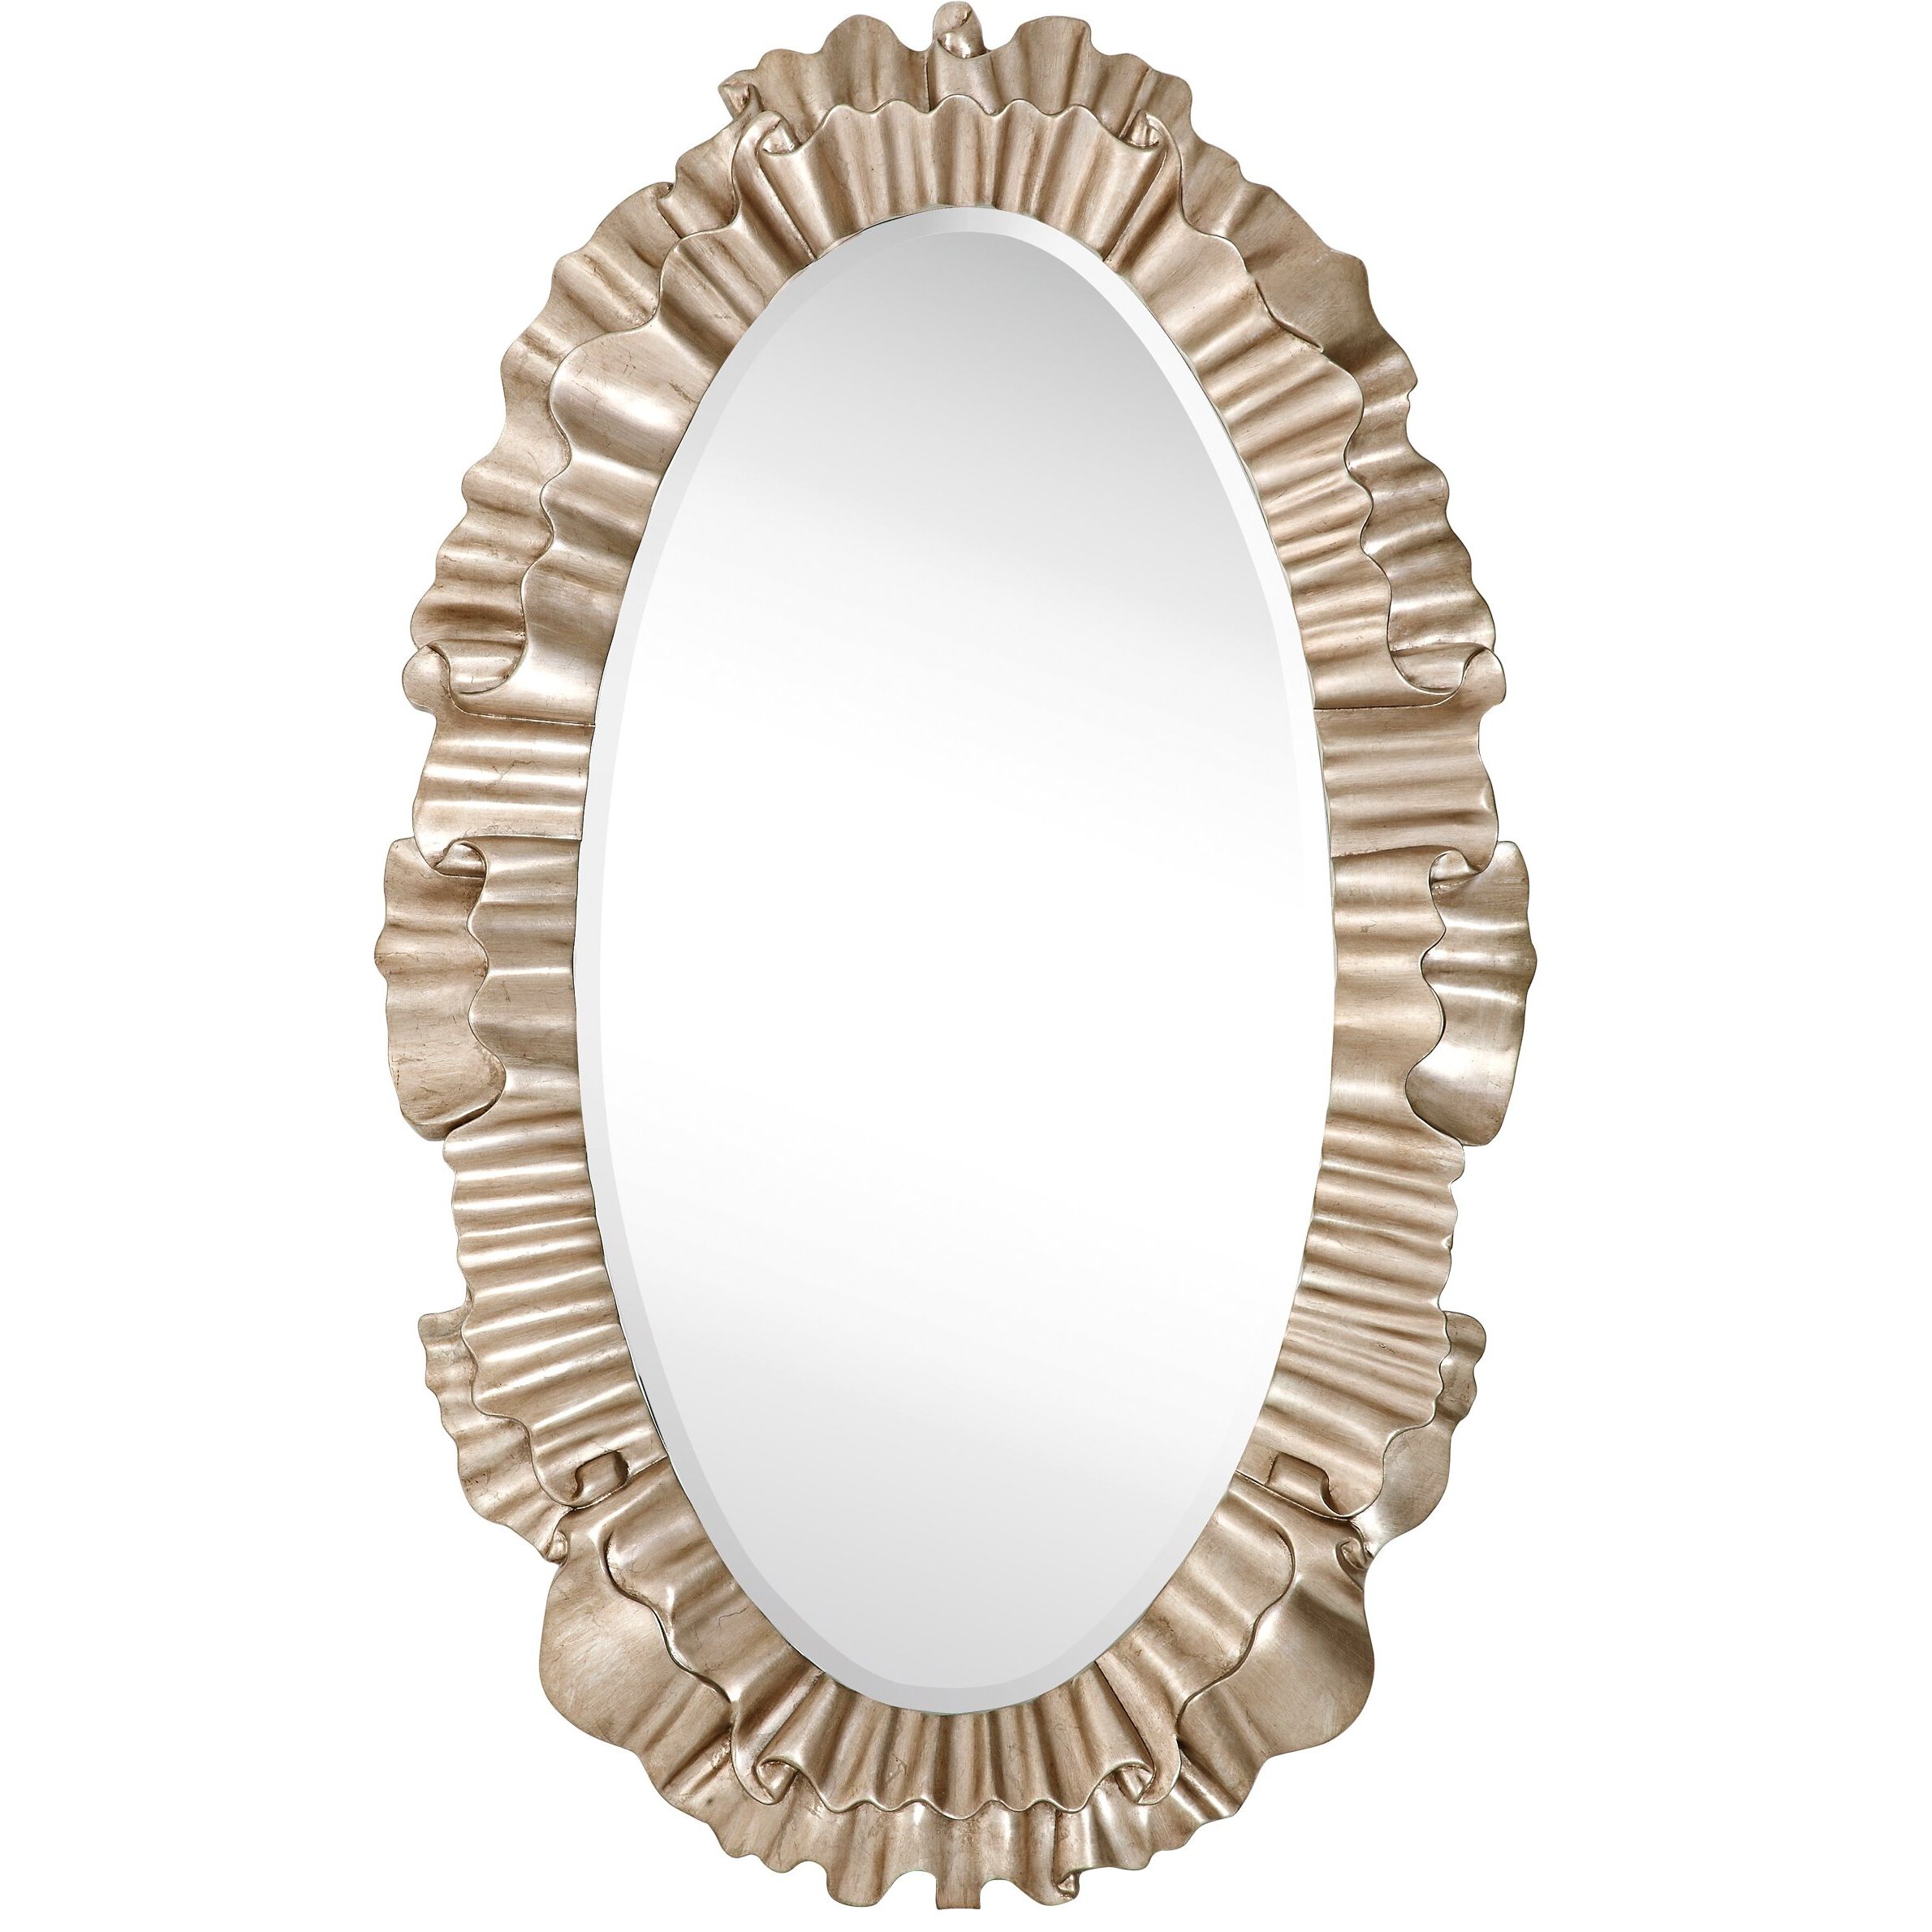 Newest Metallic Gold Leaf Wall Mirrors With Majestic Mirror Oval Antique Silver Leaf Ornate Framed Beveled Glass (View 13 of 15)